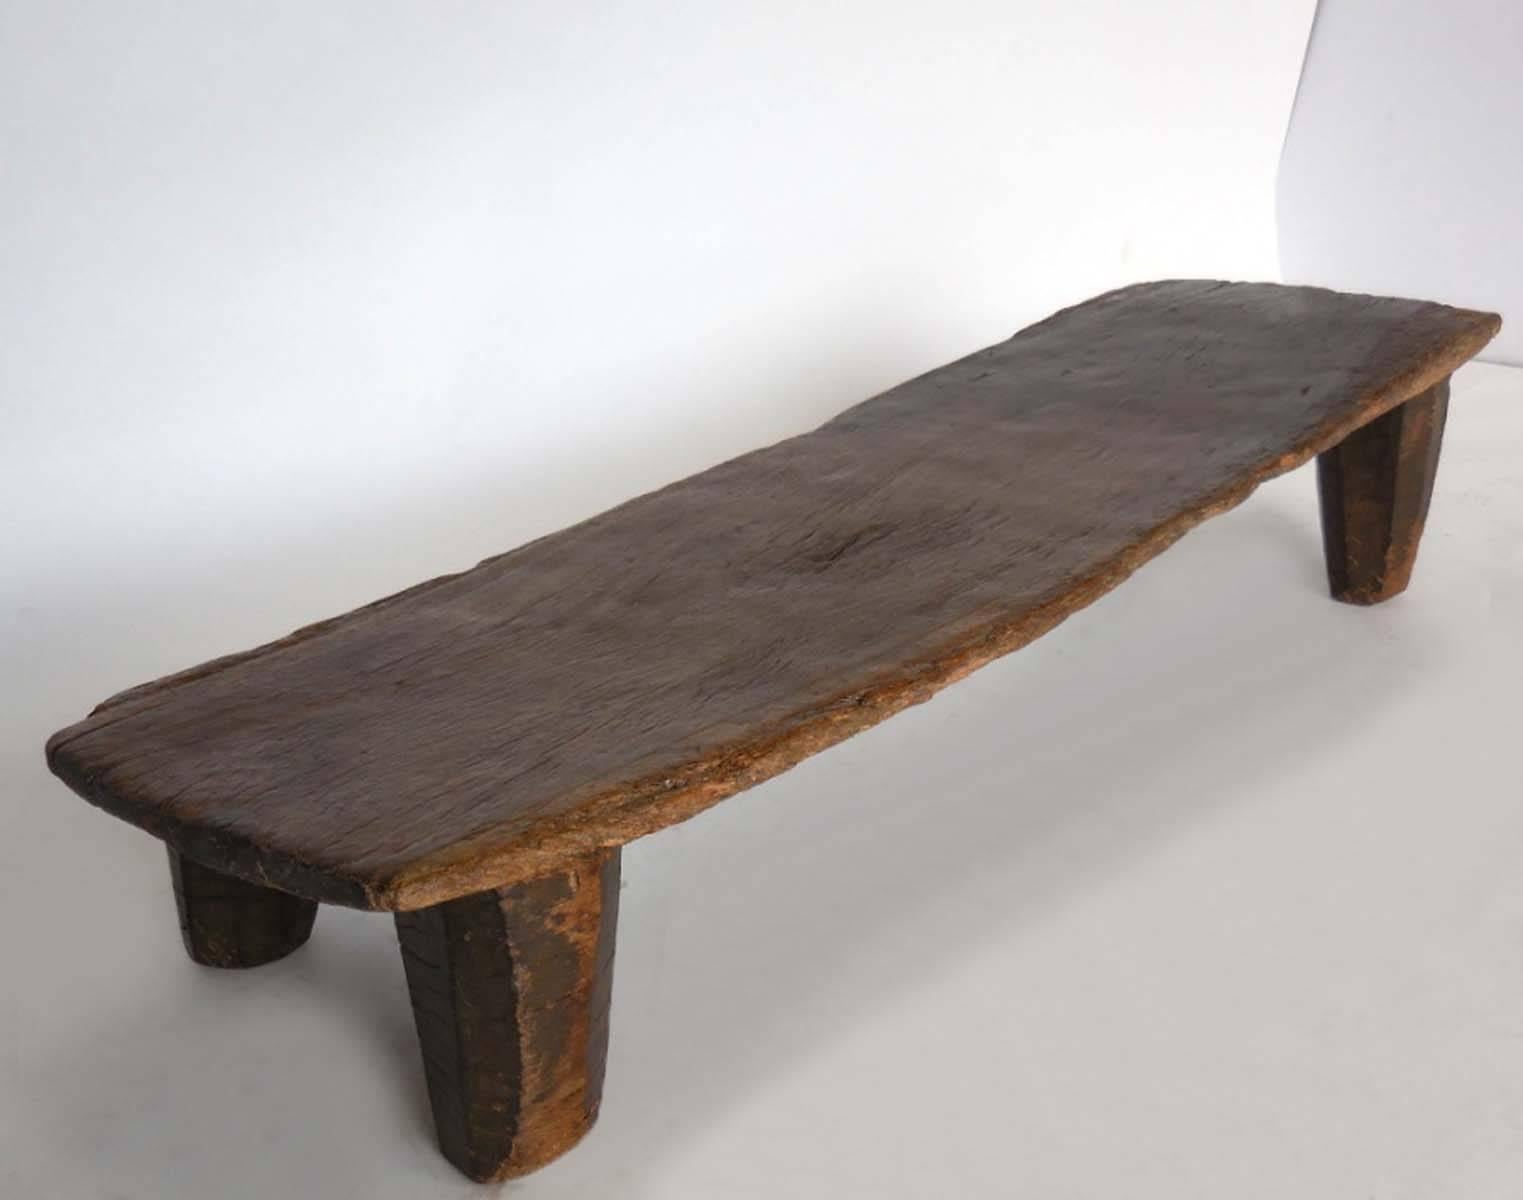 Carved out of one single piece of wood, this is a child's bed from the Nupe tribe in northern Nigeria.
Wonderful old patina throughout. Carved conical primitive legs. Swooping top from 8.5 inches to 11 inches tall. Great little coffee table, bench